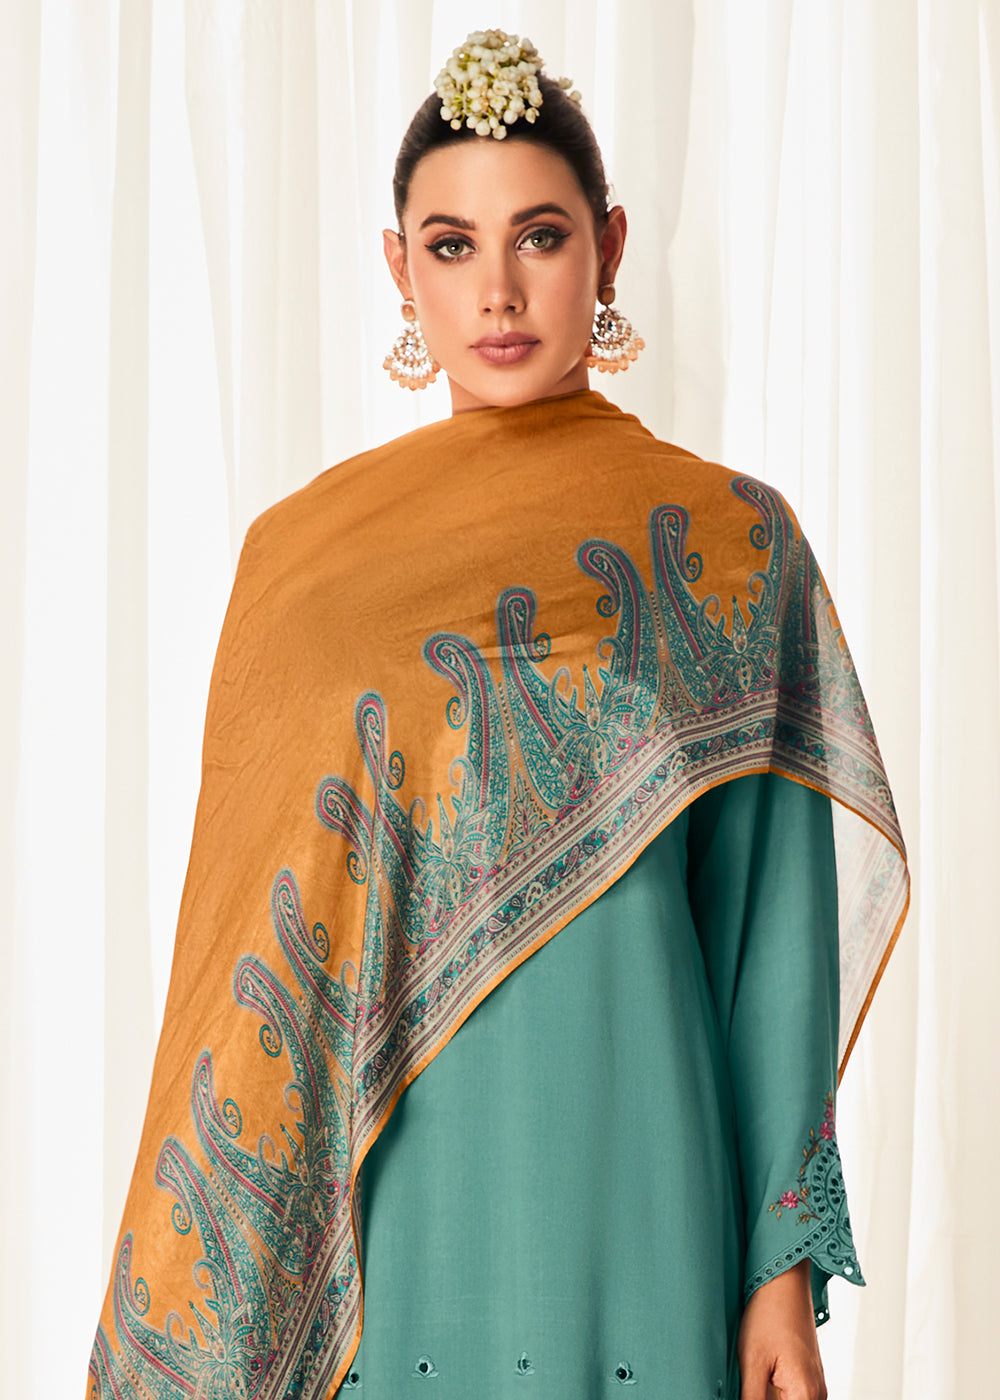 Buy Now Pleasing Turquoise Suzani Inspired Embroidered Ethnic Salwar Suit Online in USA, UK, Canada, Germany, Australia & Worldwide at Empress Clothing. 